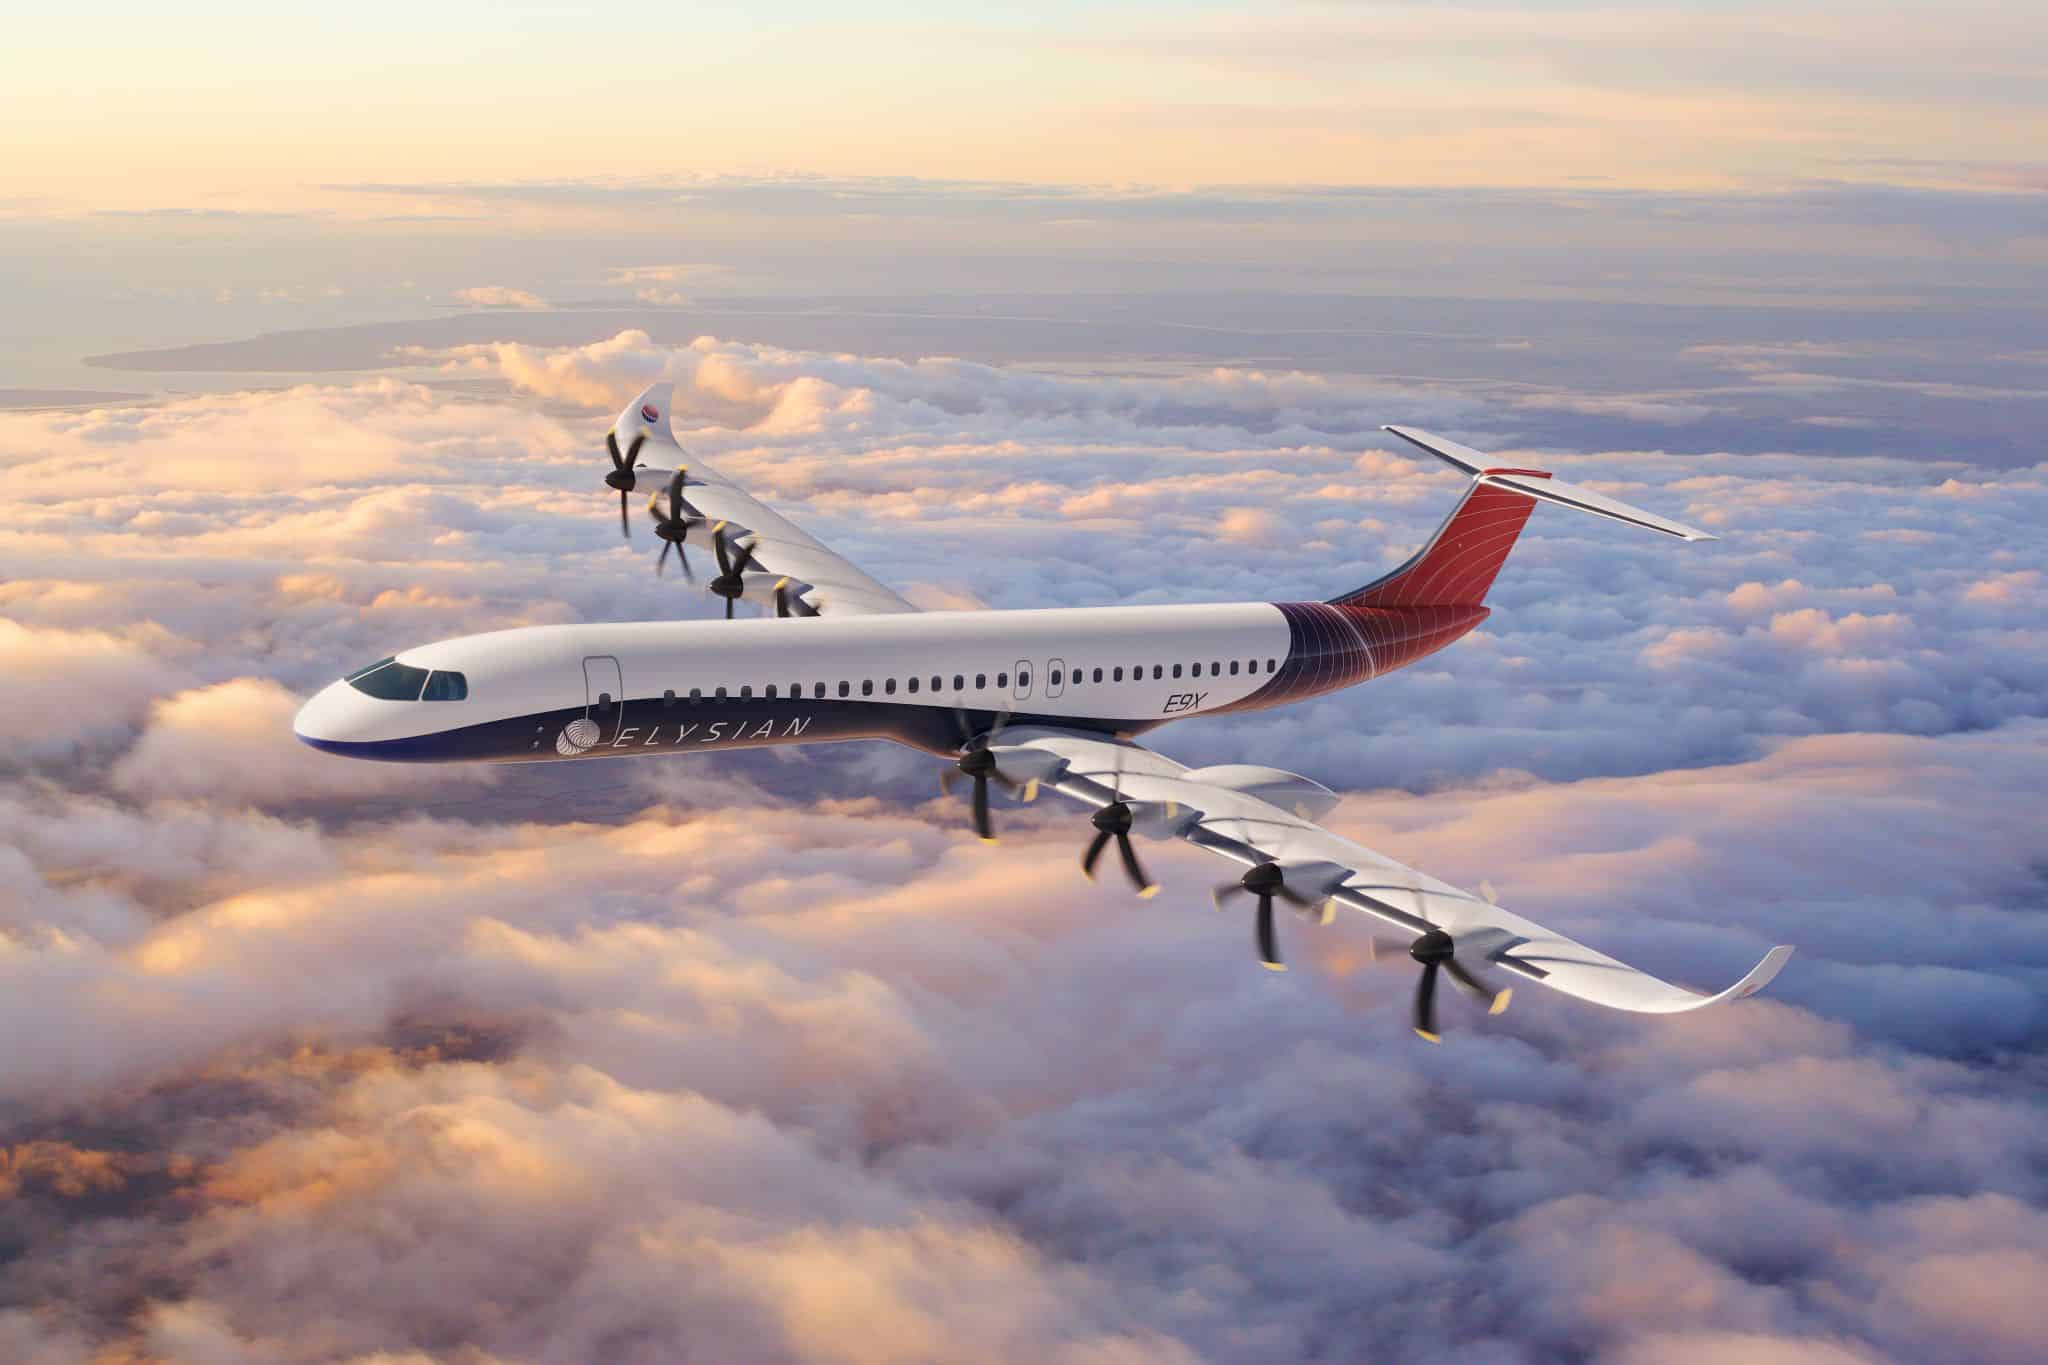 Electric skies beckon as Dutch firm Elysian unveils 90-seat battery-powered airliner